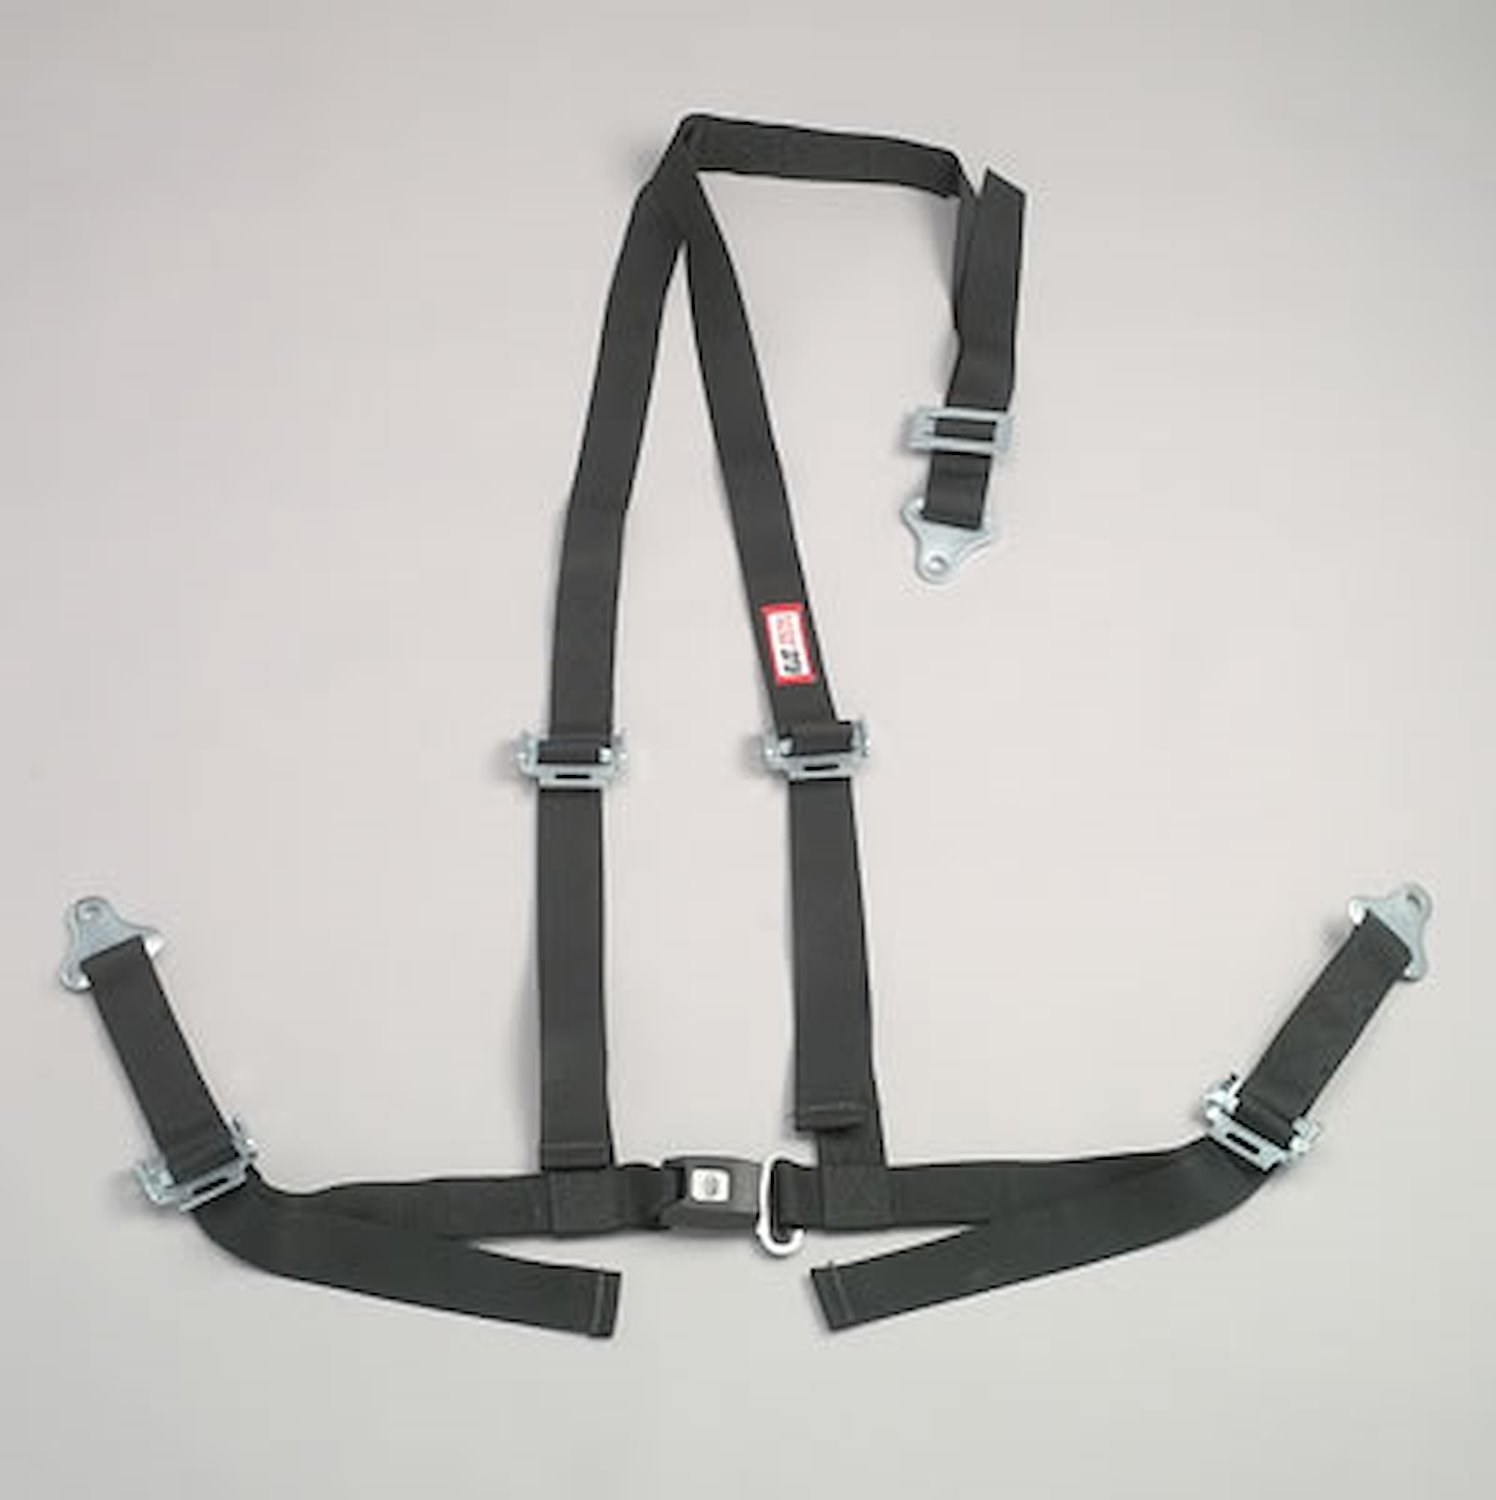 NON-SFI B&T HARNESS 2 PULL UP Lap Belt SNAP 2 S. H. Individual ROLL BAR Mount WRAP/BOLT w/STERNUM STRAP RED